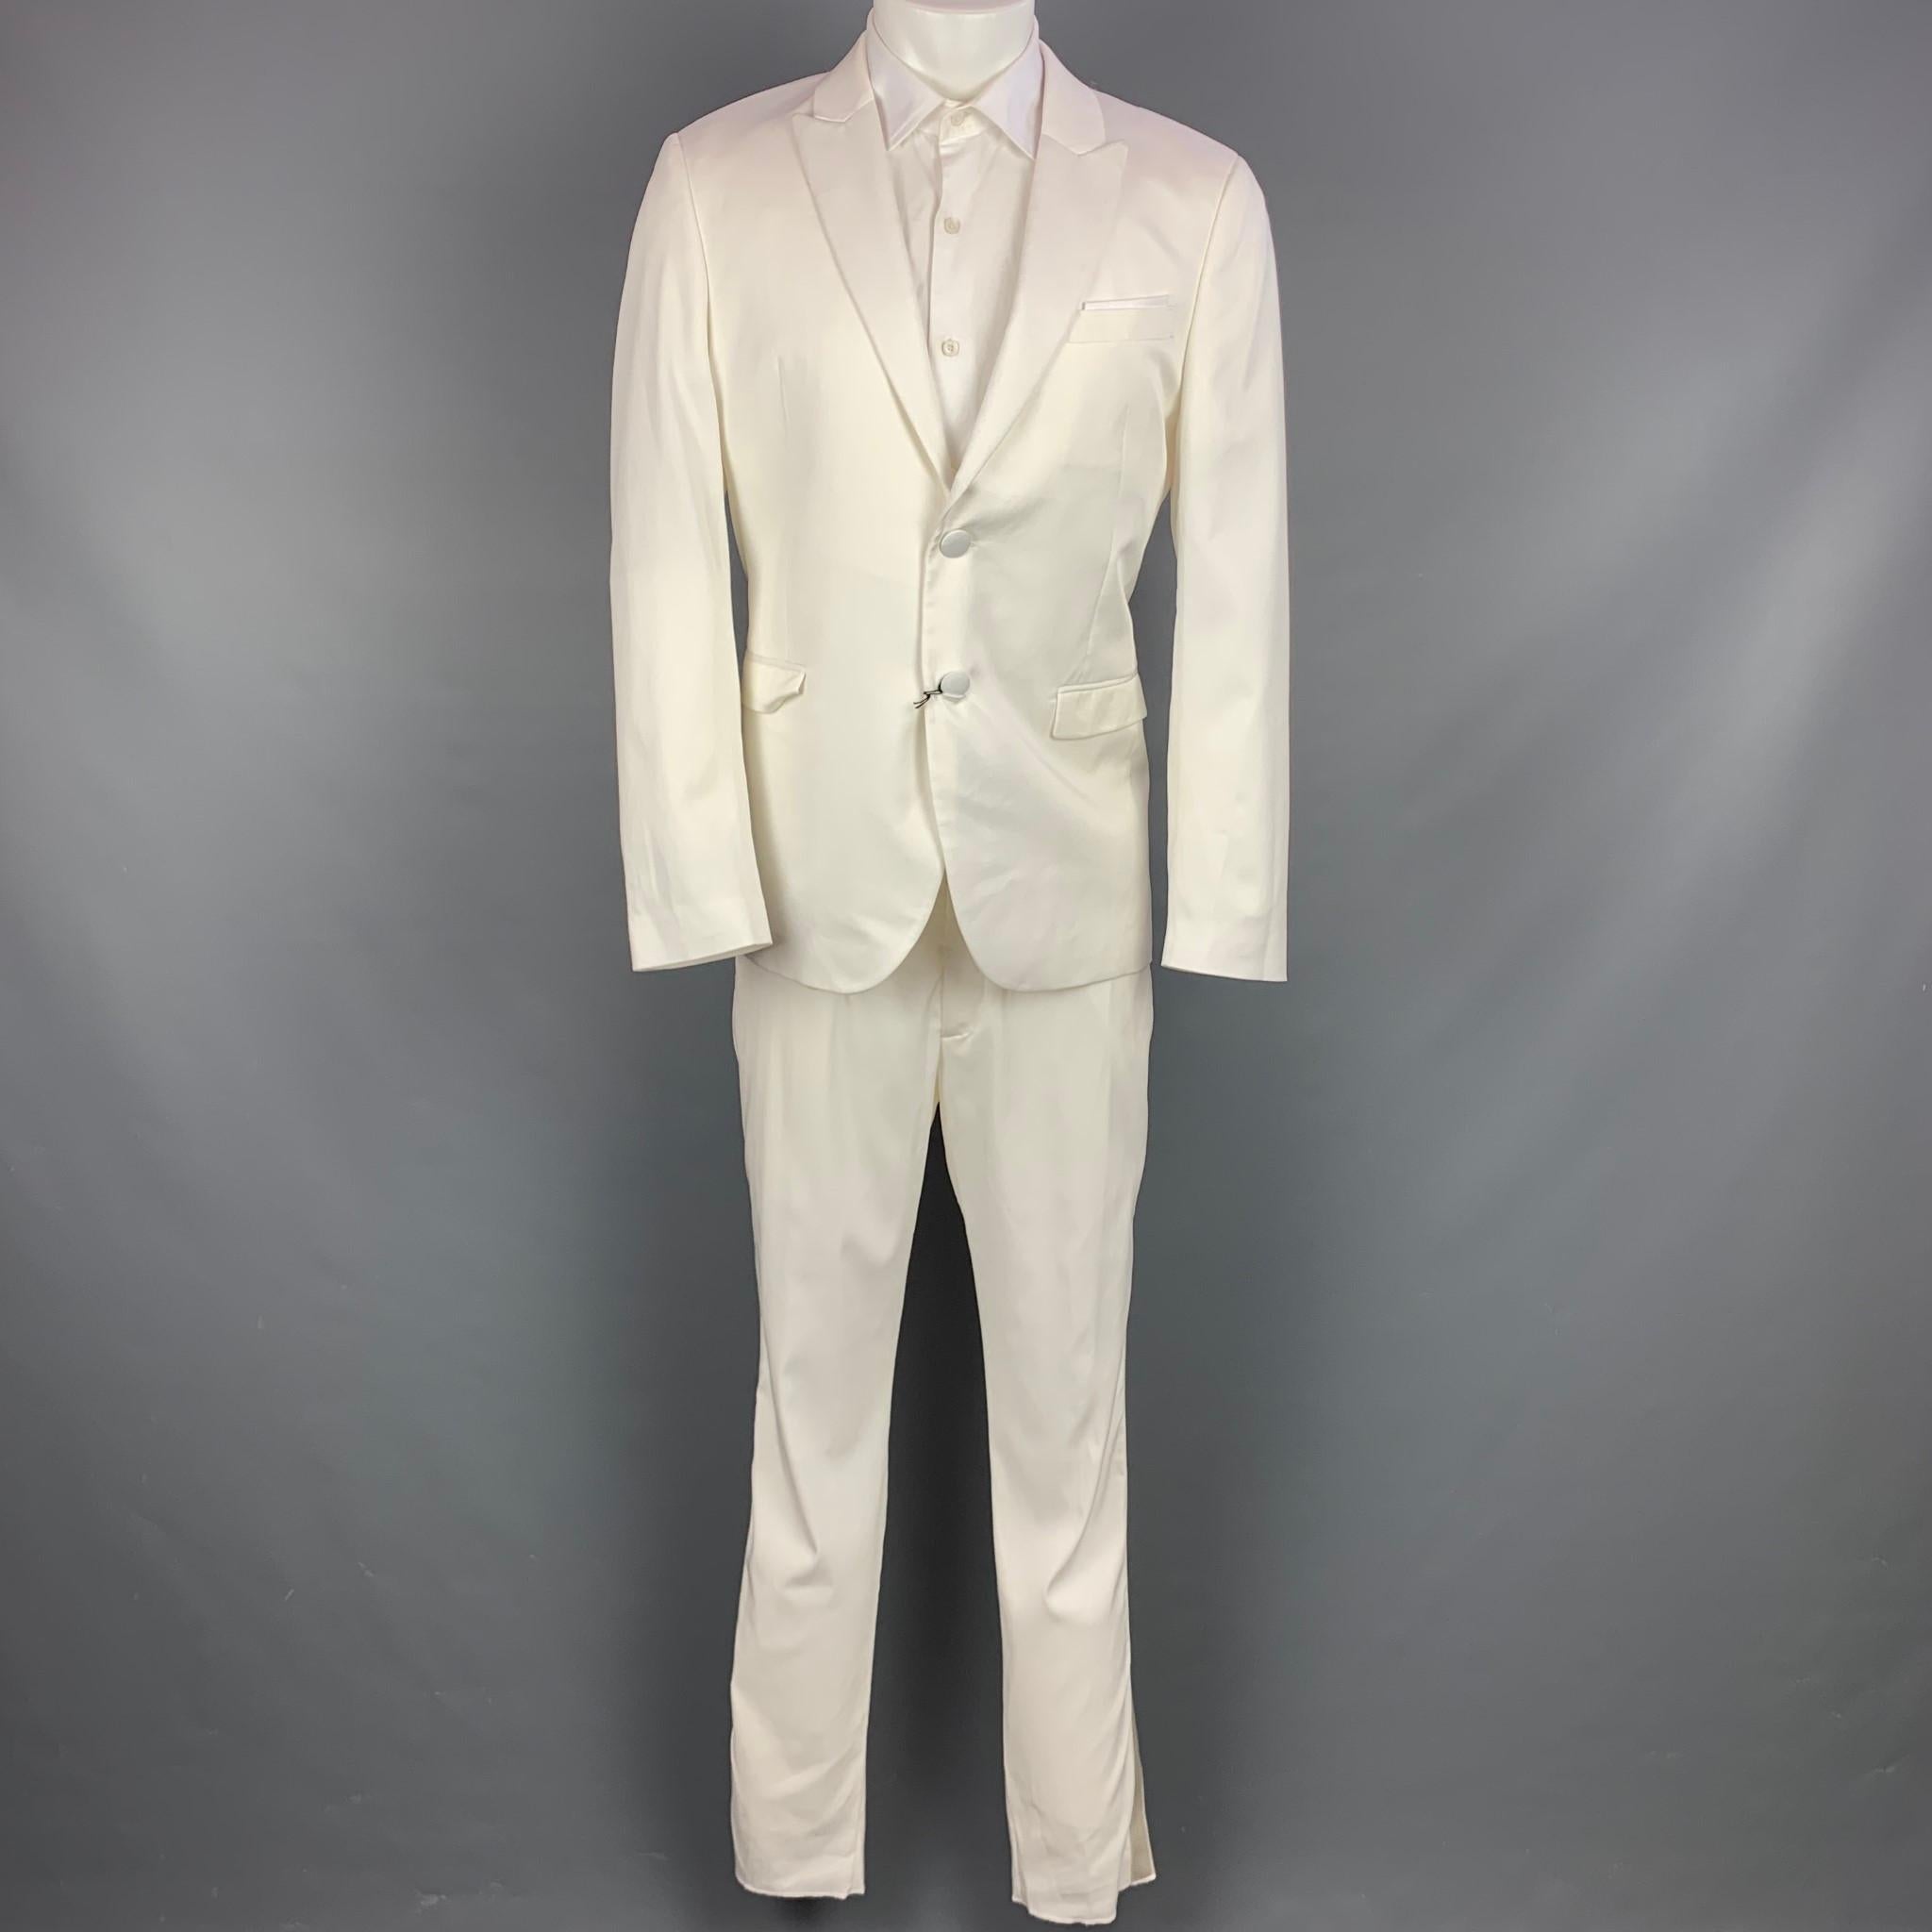 NEIL BARRETT suit comes in a white tencel with a full liner and includes a single breasted, double button sport coat with lapel peak and matching flat front trousers. Made in Italy.

New With Tags.
Marked: Jacket: IT 50
Pants: IT 50
Original Retail